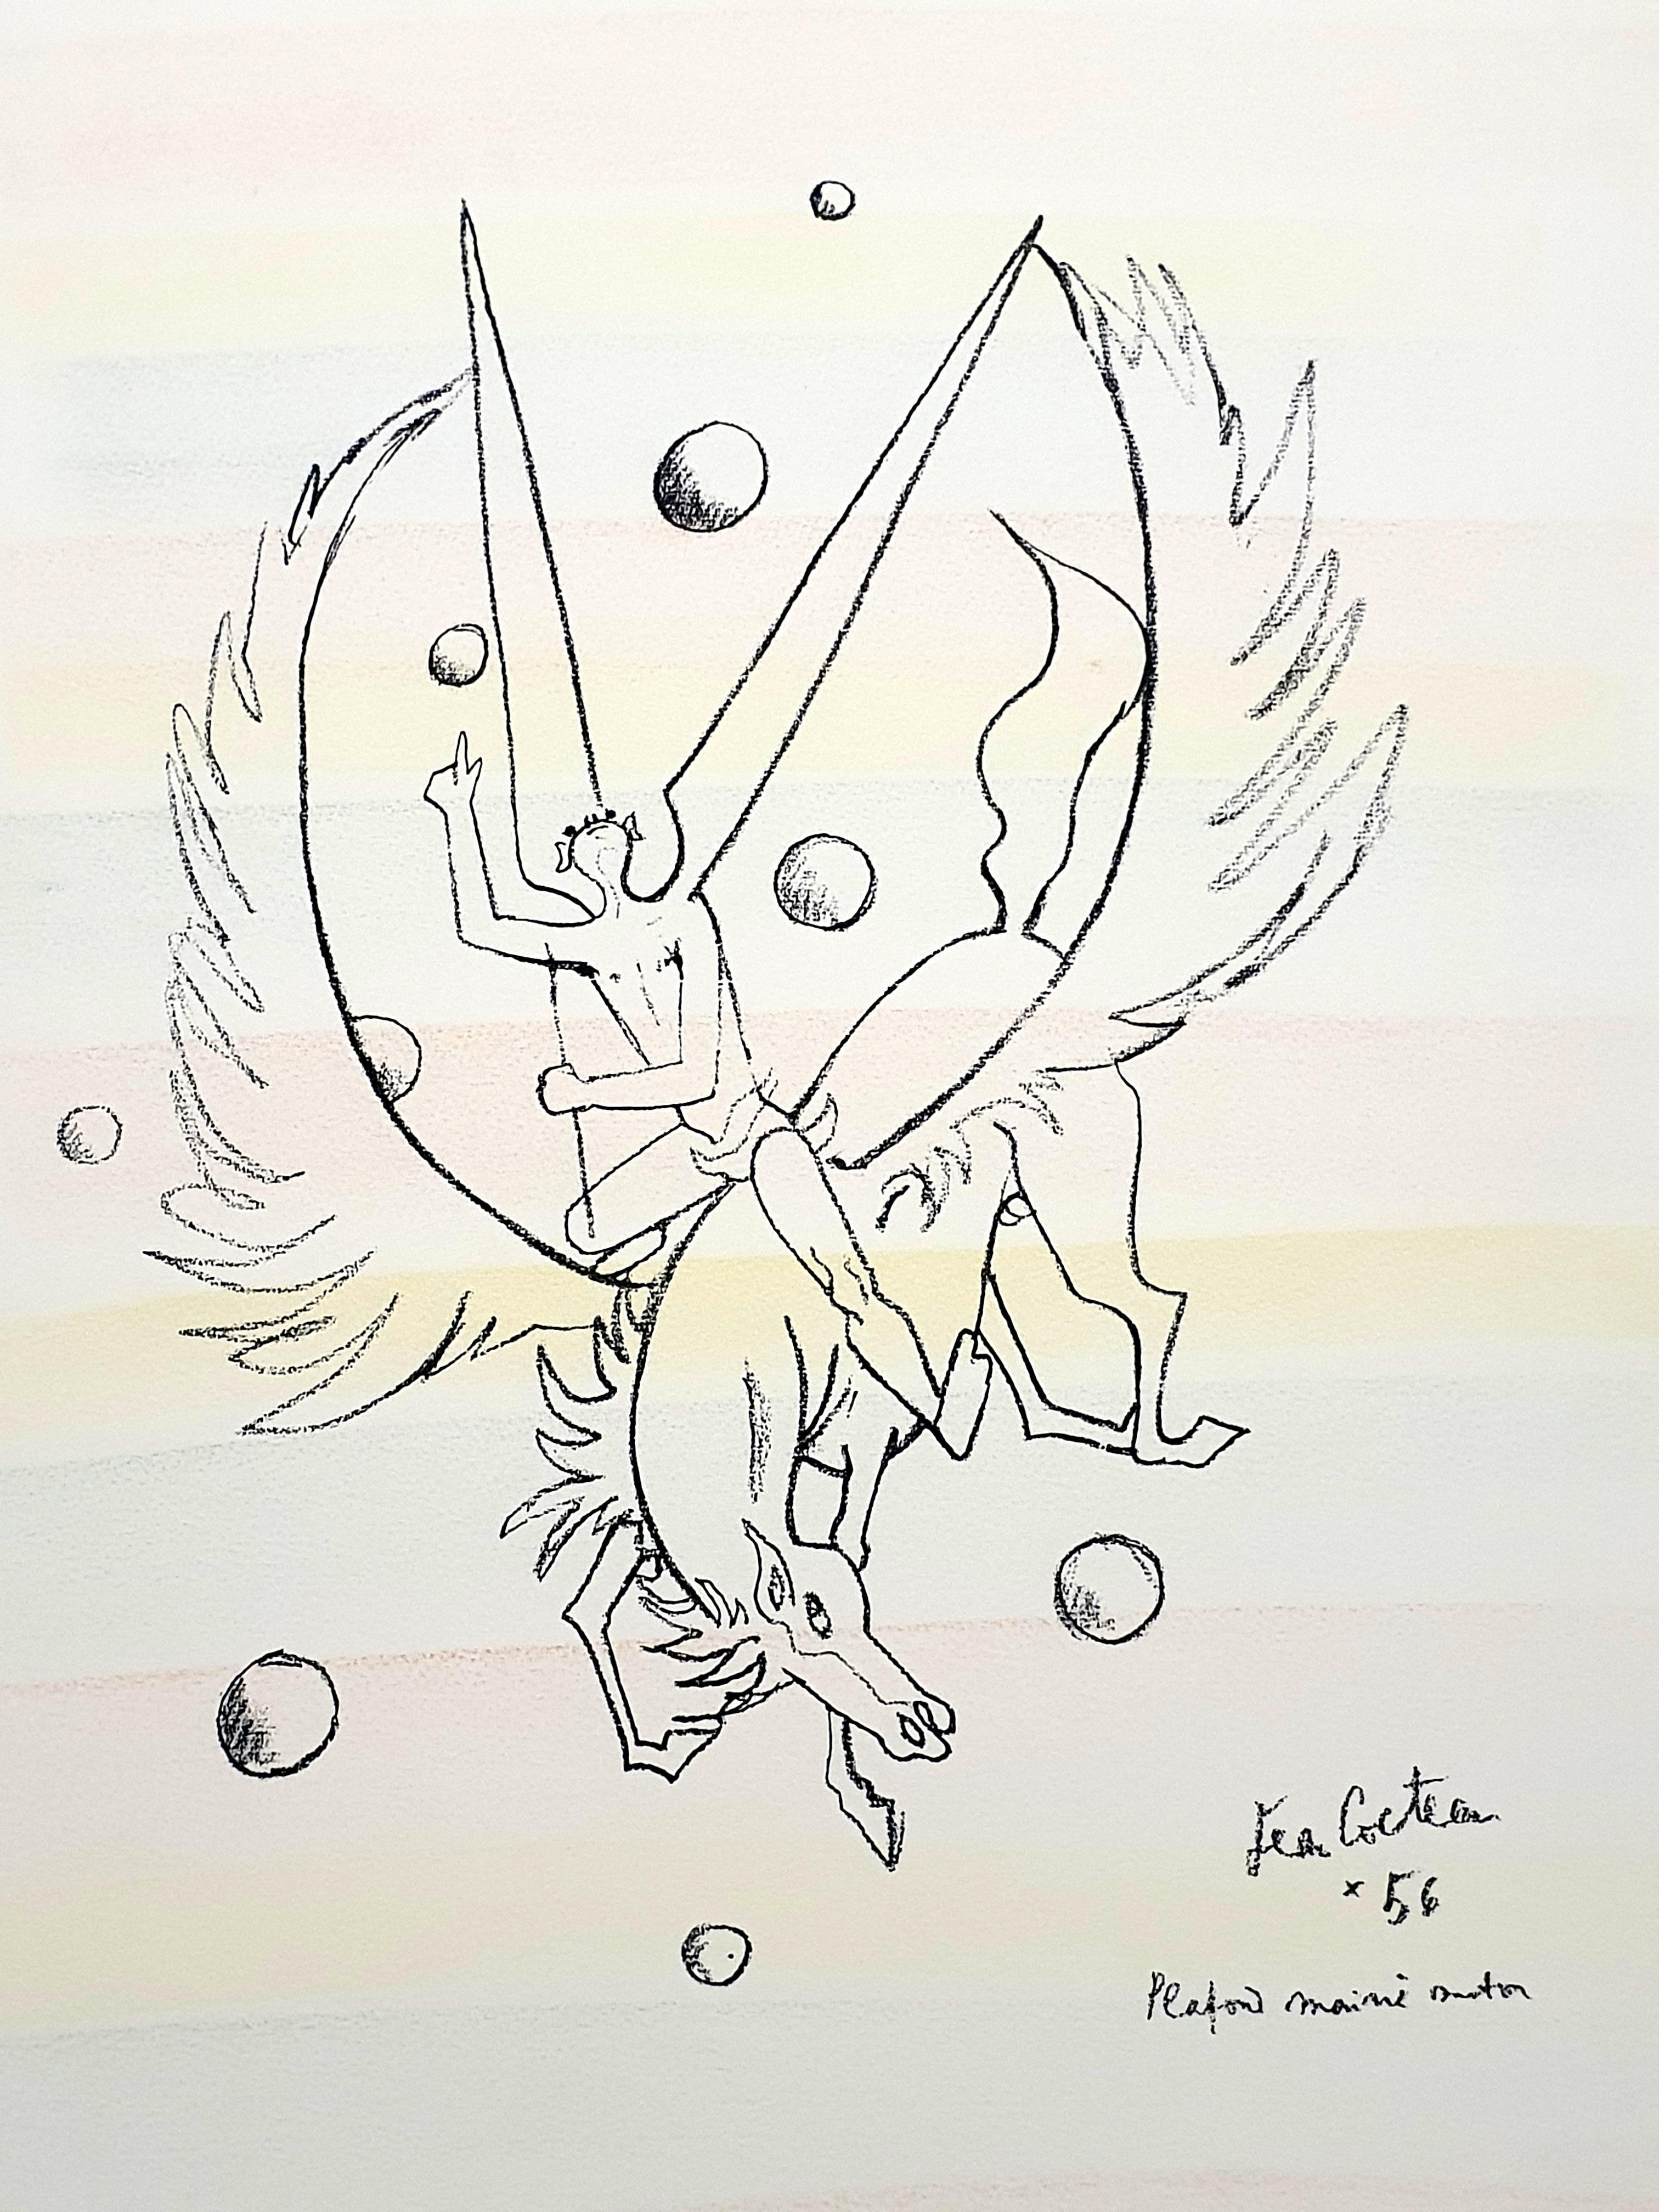 Jean Cocteau - Pegasus - Original Handcolored Lithograph
1956
Stampsigned lower right
Signed and dated in the plate
Numbered in pencil
Handcolored with pastel
Edition : /200
Dimensions: 65 x 50 cm
Provenance : Succession Dermit, Cocteau's heir